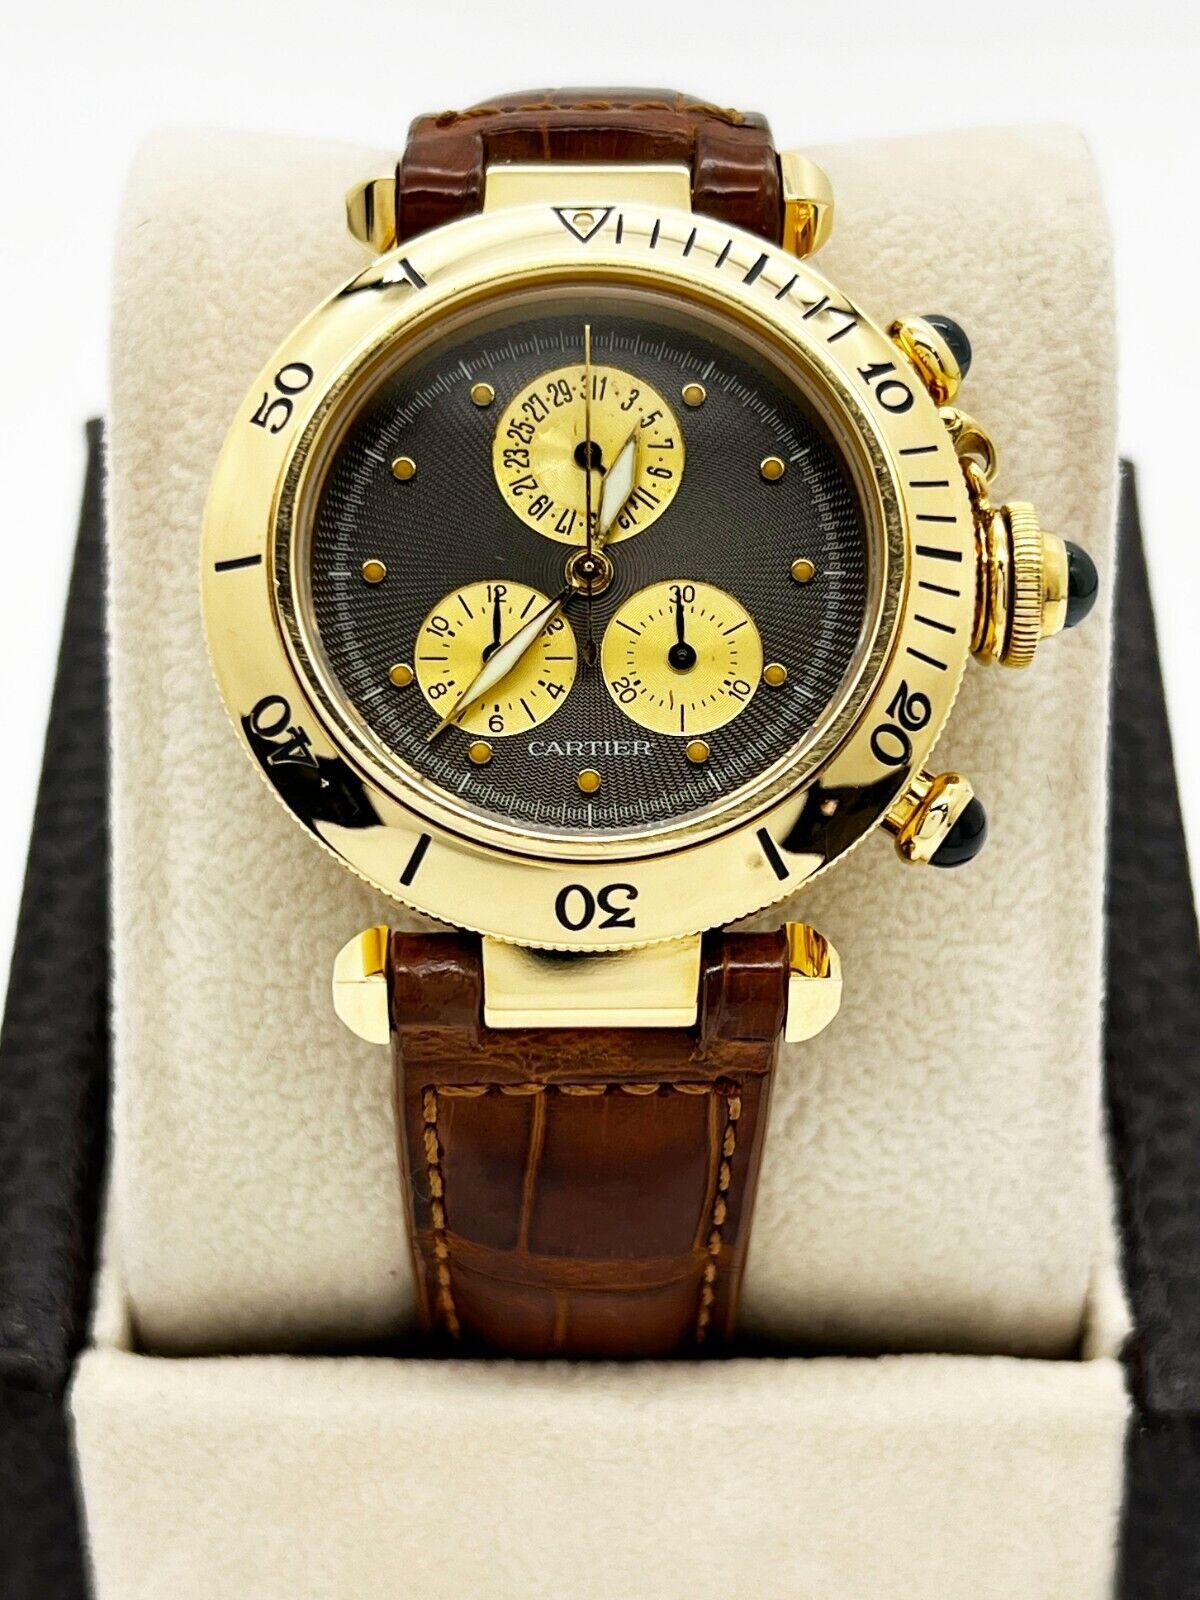 Cartier Pasha Ref 1353 Chronograph 18K Yellow Gold 35mm Leather Strap In Excellent Condition For Sale In San Diego, CA